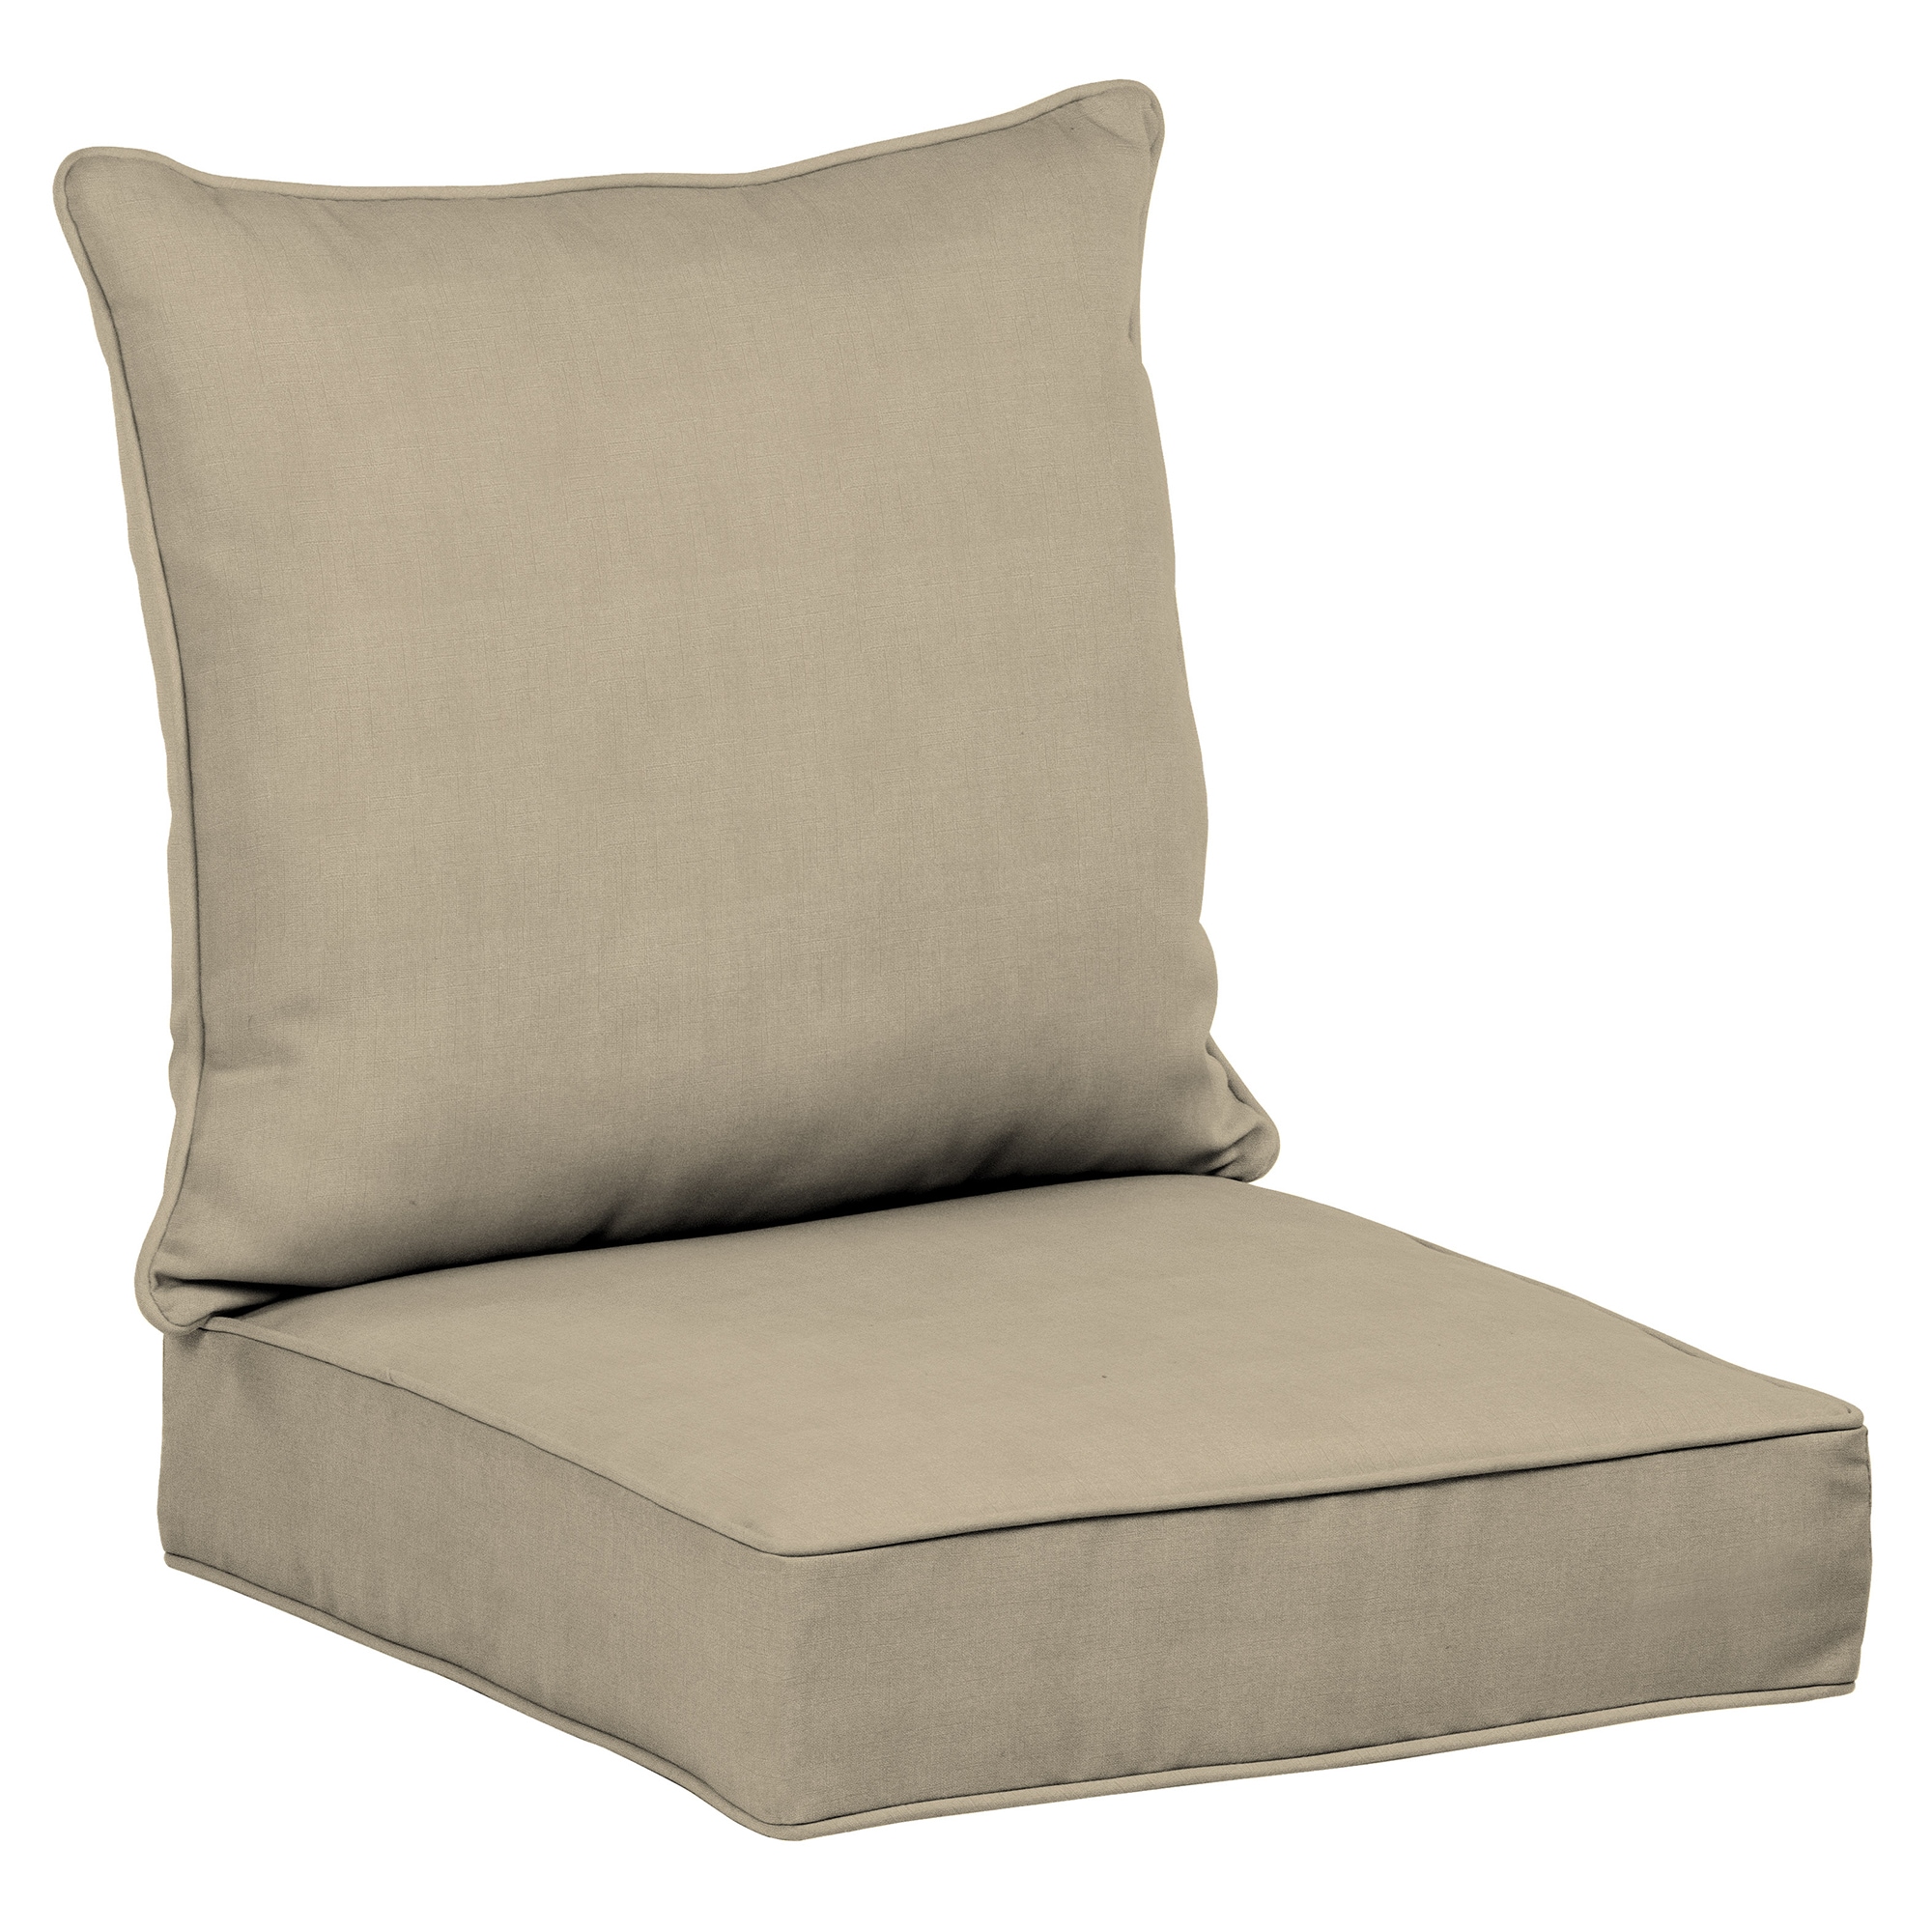 Allen Roth 2 Piece Madera Linen Wheat Deep Seat Patio Chair Cushion In The Furniture Cushions Department At Com - Allen And Roth Patio Pillows